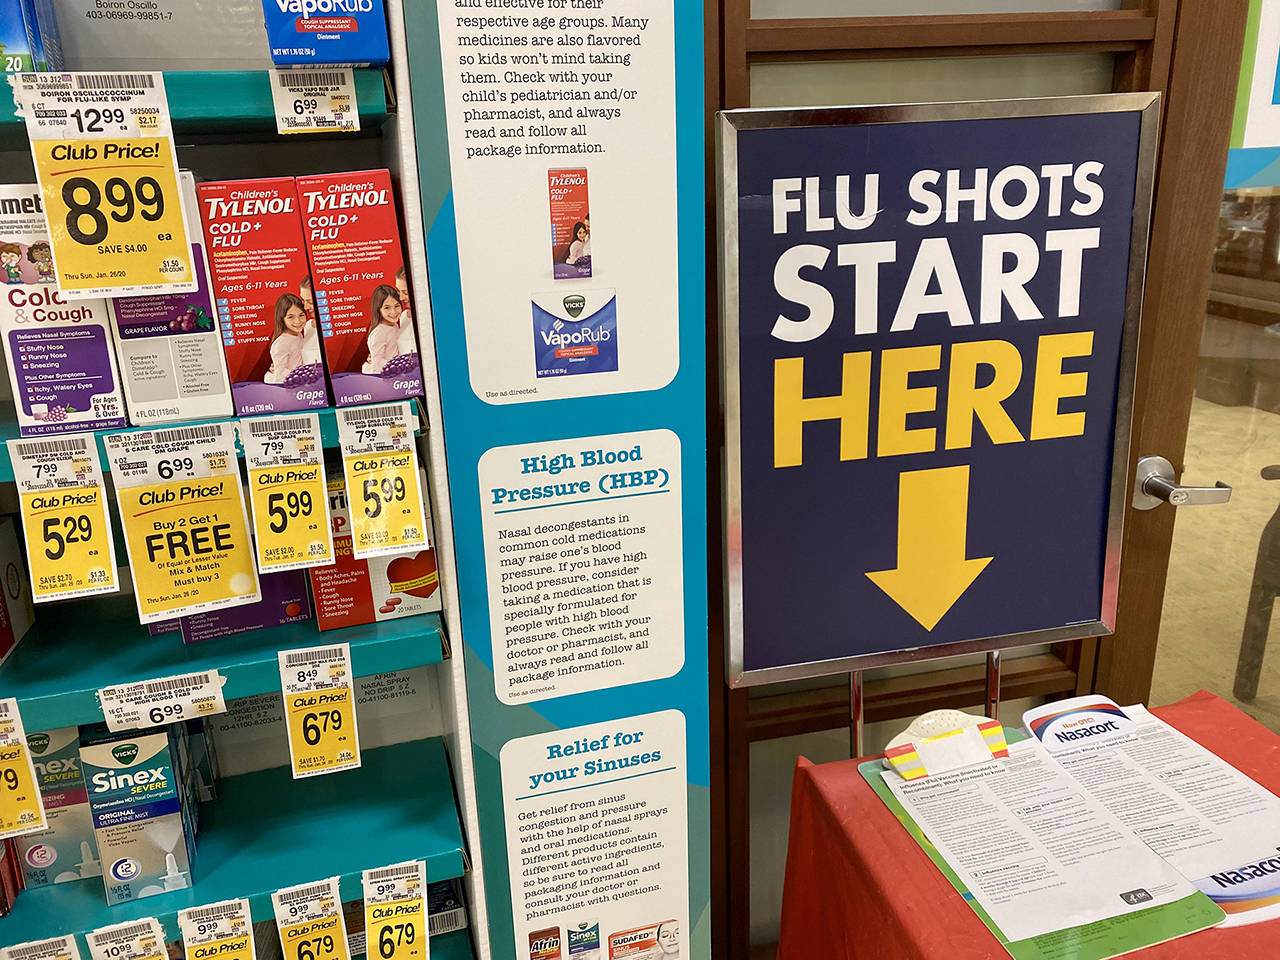 Flu shots are available at a variety of places throughout Snohomish County, including this Safeway in Everett. (Sue Misao / The Herald)